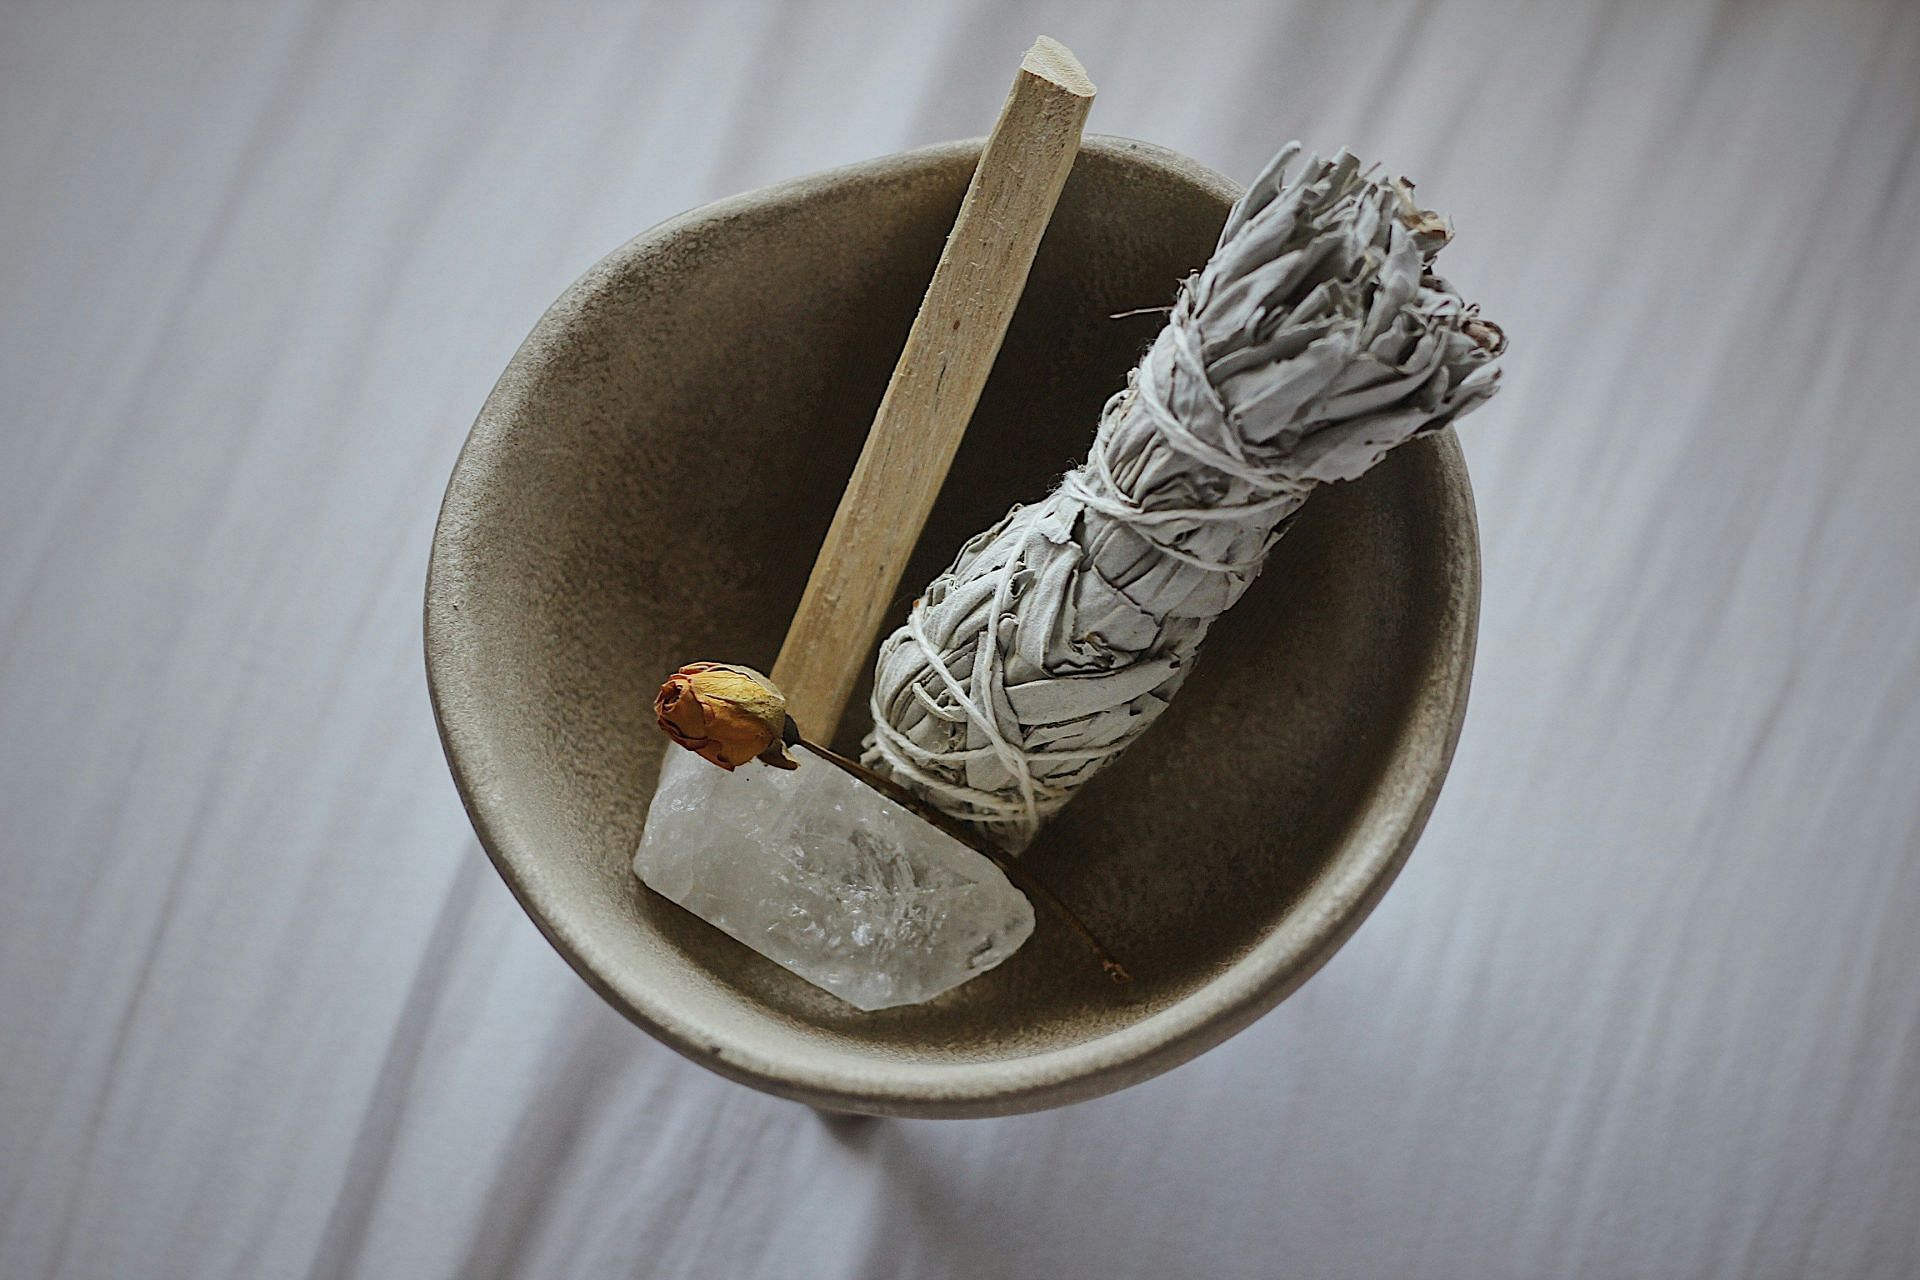 What is a sage herb and are there any benefits of using sage? (Image by Karly Jones/Unsplash)